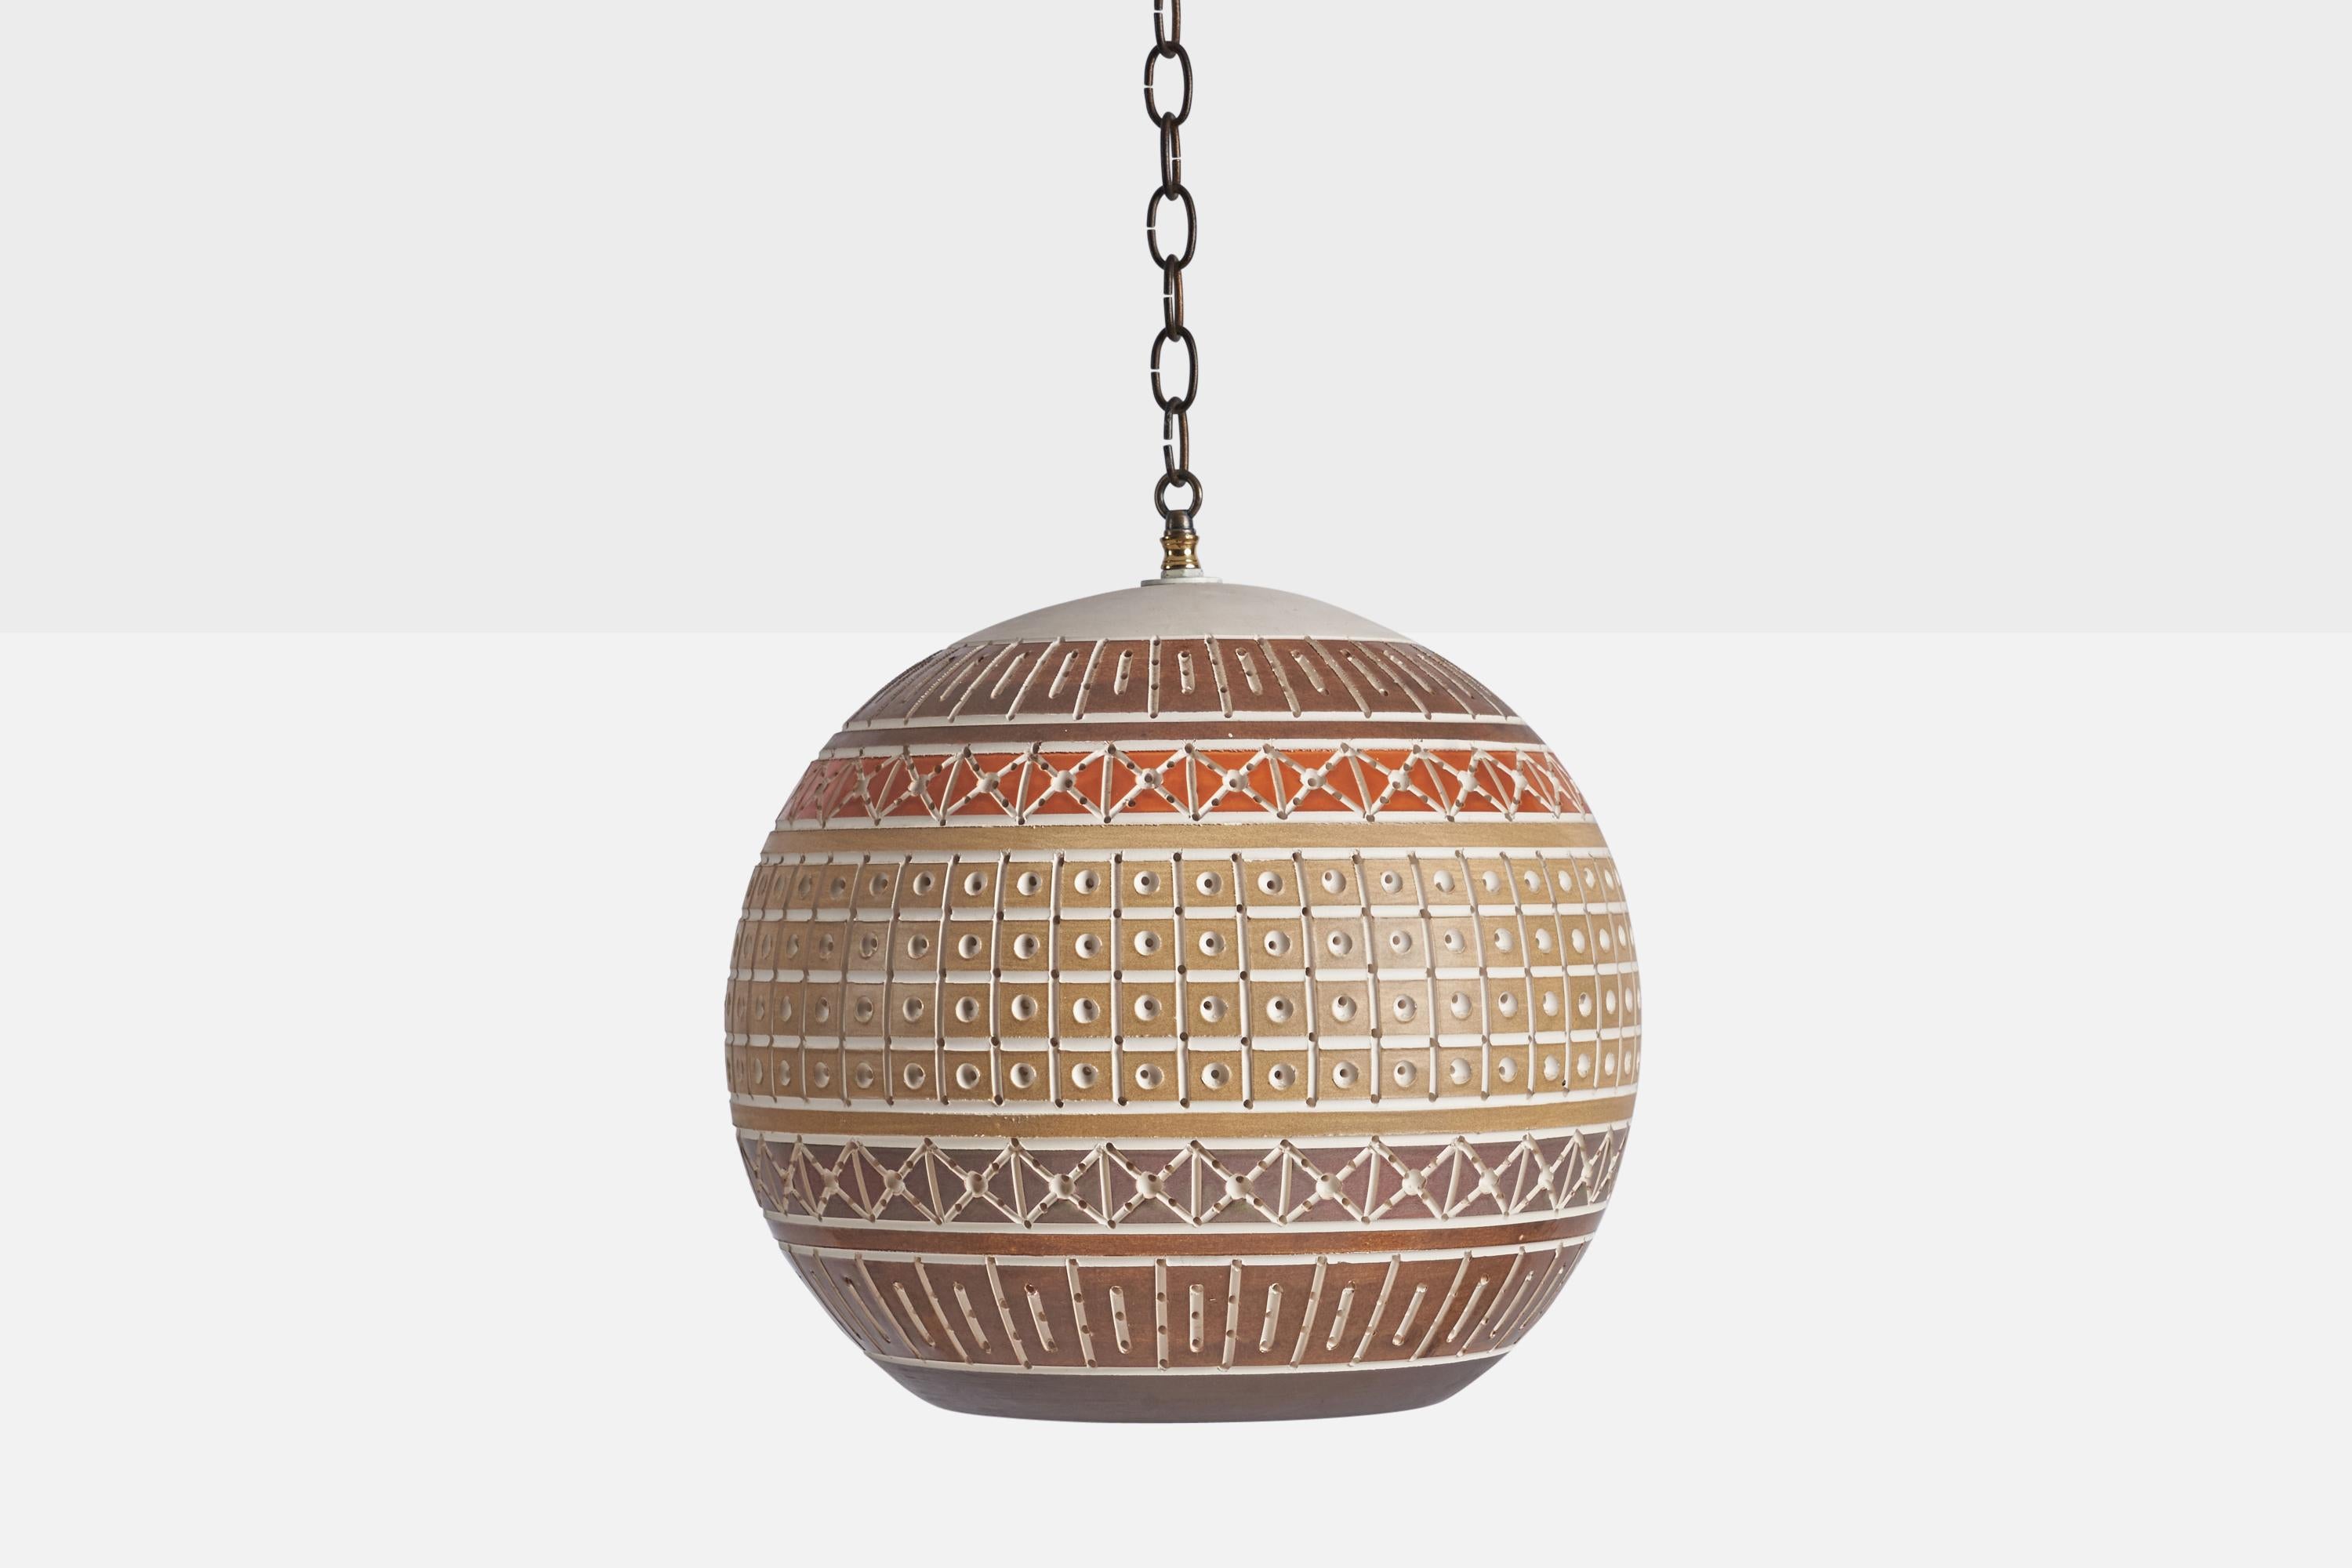 A hand-painted brown grey and yellow pendant light, designed and produced by Martha & Beaumont Mood, San Antonio, Texas, USA, 1970s 
Drop adjustable

Overall Dimensions (inches): 15” H x 17” Diameter
Bulb Specifications: E-26 Bulb
Number of Sockets: